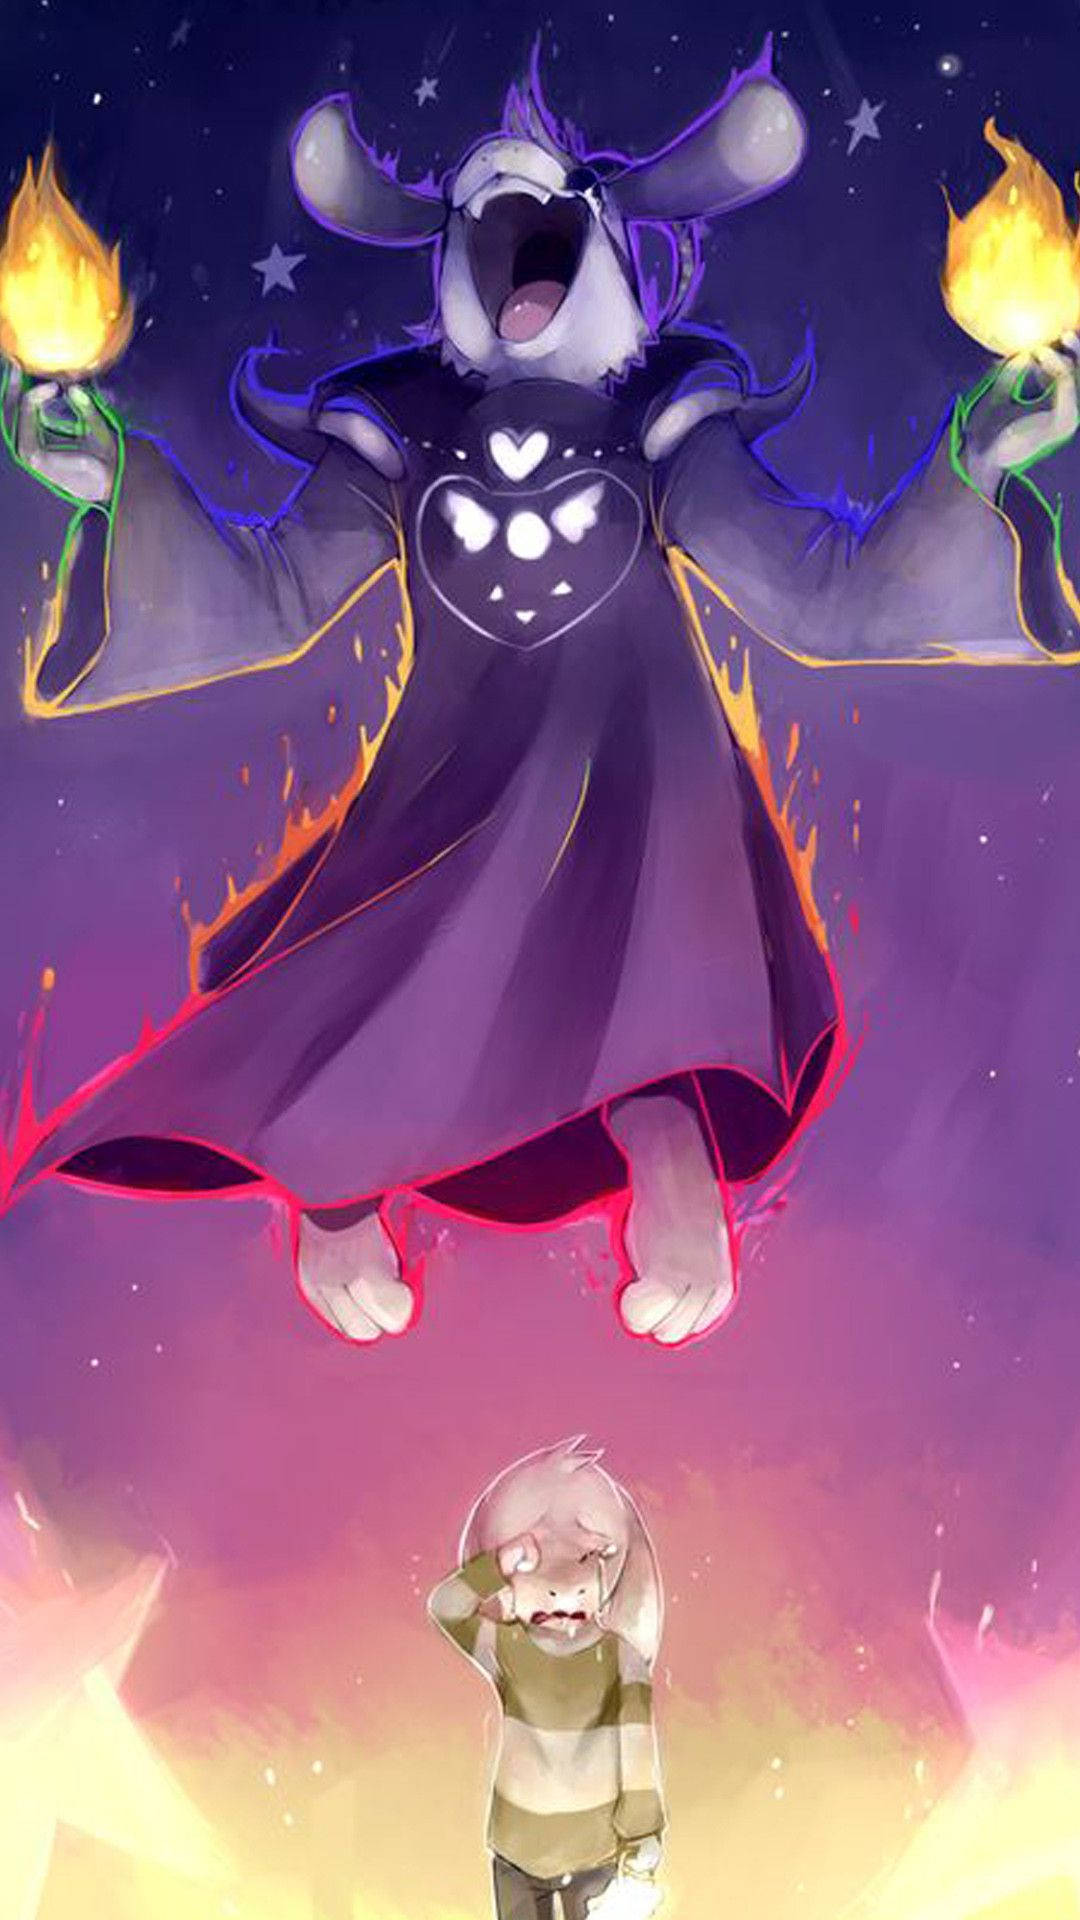 Undertale floating Asriel laughing and Chara on ground wallpaper.